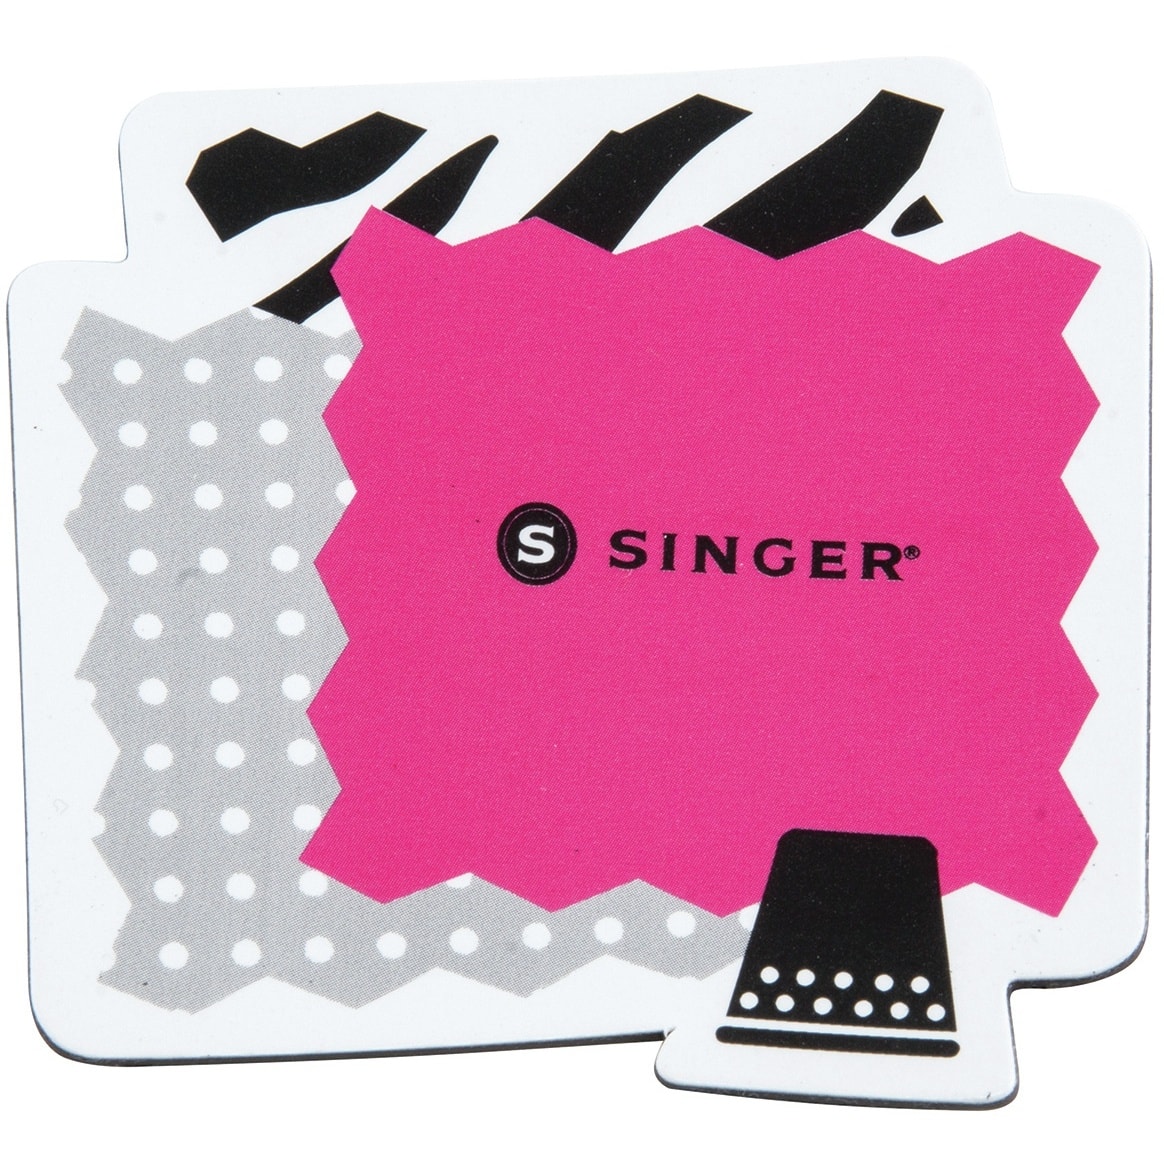 SINGER&#xAE; Assorted Large Eye Hand Needles With Magnet, 12ct.